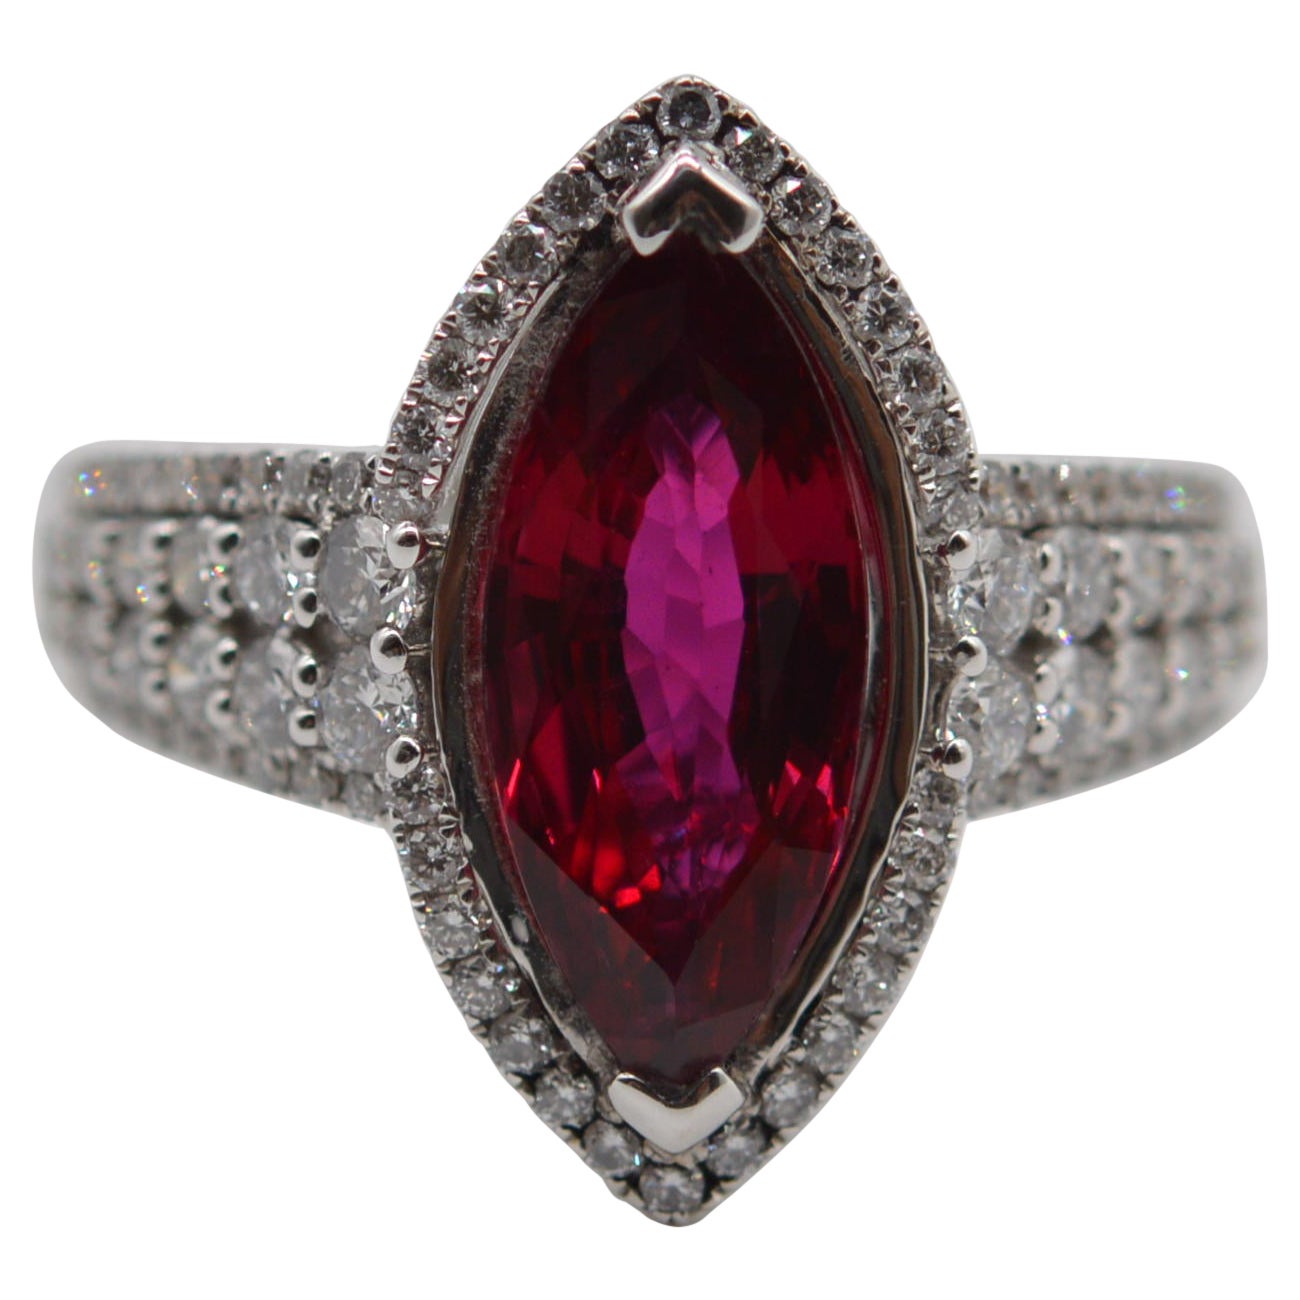 Siam Marquise Ruby Ring 2.95 Cts Heated C.Dunaigre Certified Unworn For Sale